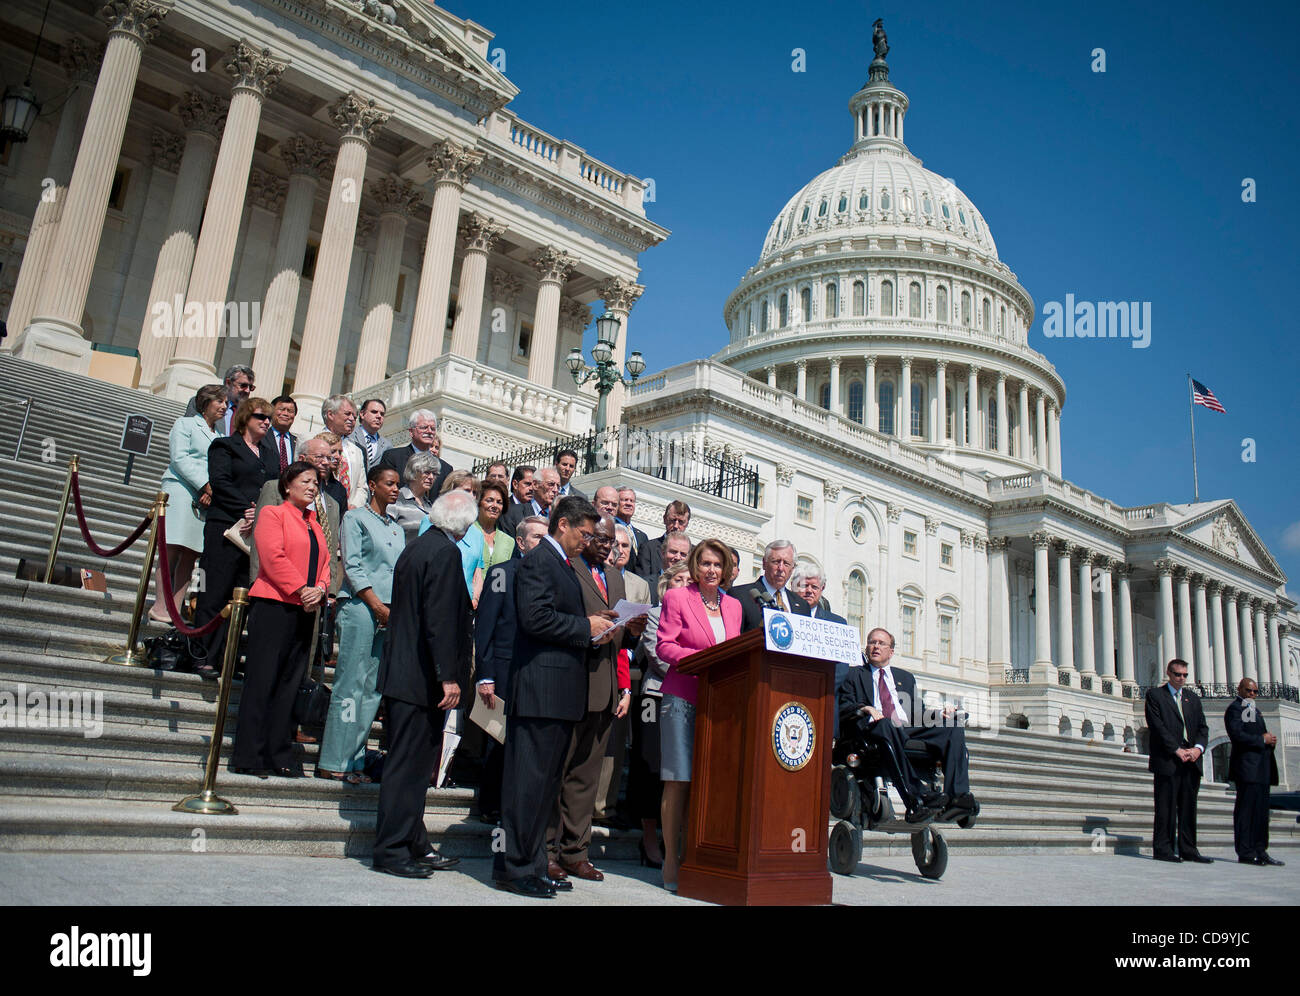 Jul 28, 2010 - Washington, District of Columbia, U.S., -.Speaker NANCY PELOSI, House Democratic Leaders, and House Democrats hold a press conference on the House Steps of the Capitol to commemorate the 75th anniversary of the Social Security Act. President Franklin D. Roosevelt signed the act into l Stock Photo